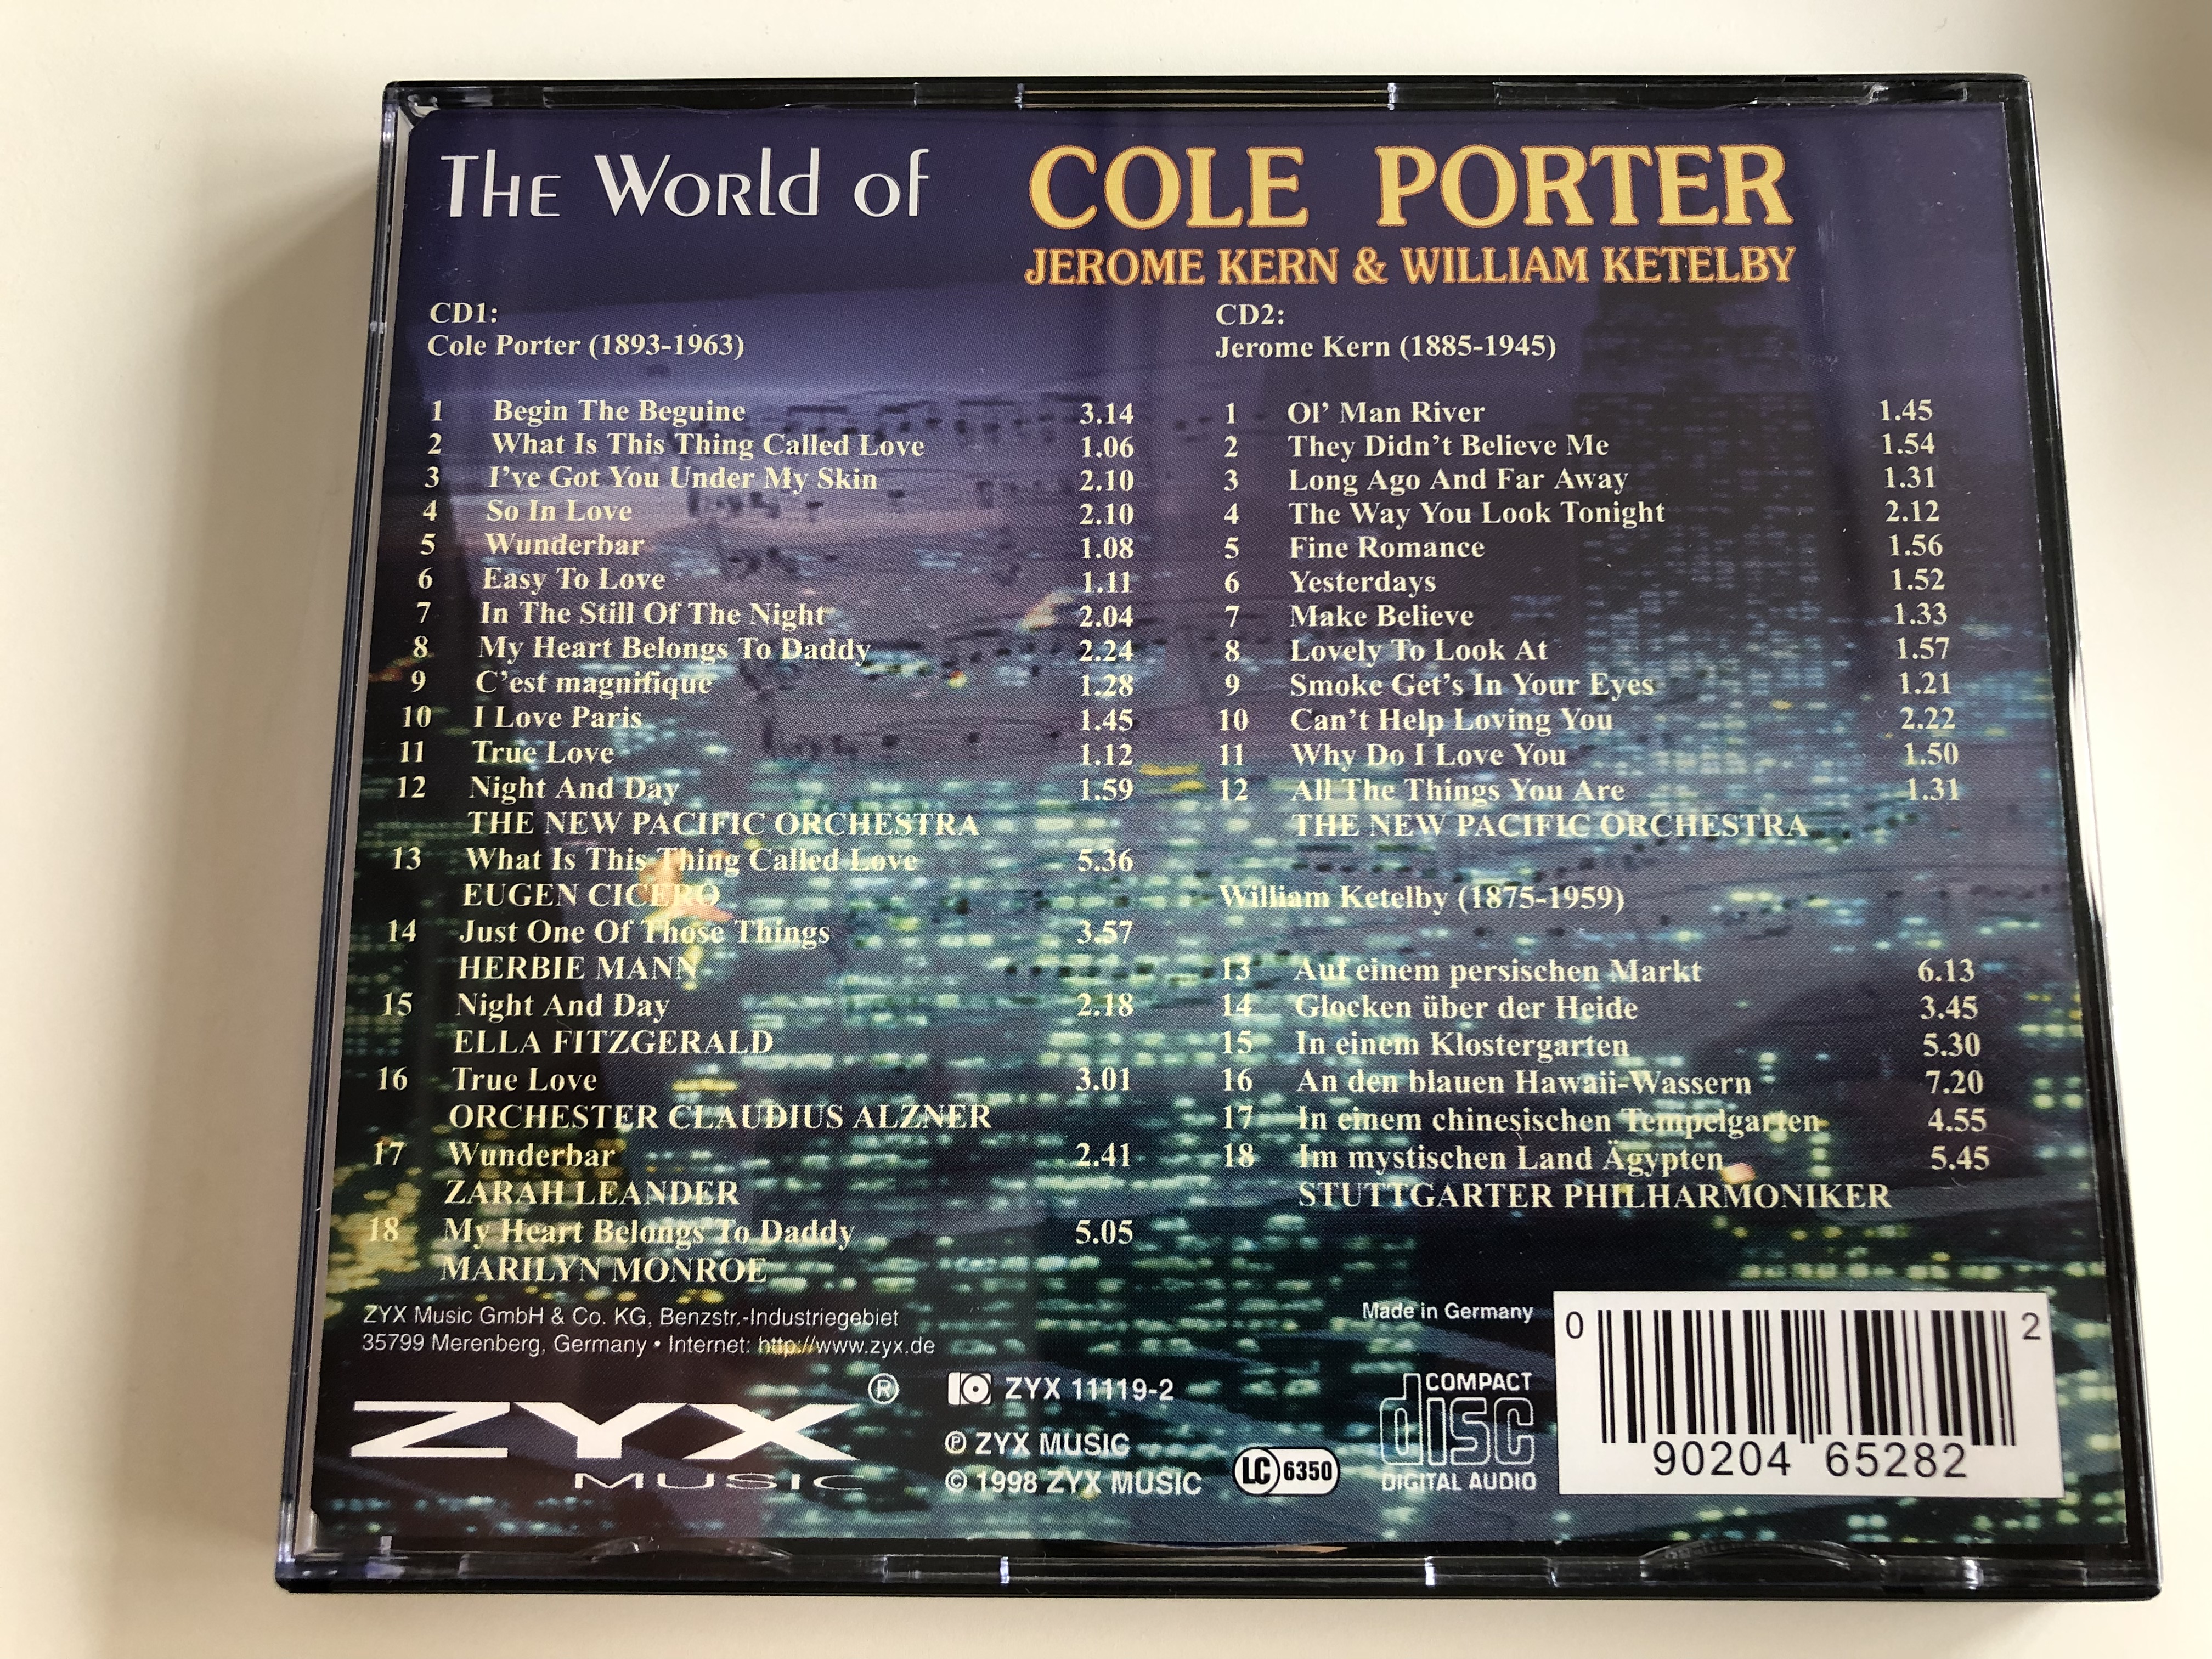 the-world-of-cole-porter-jerome-kern-william-ketelby-what-is-this-thing-called-love-true-love-night-day-i-love-paris-2-disc-audio-1998-zyx-11119-2-4-.jpg